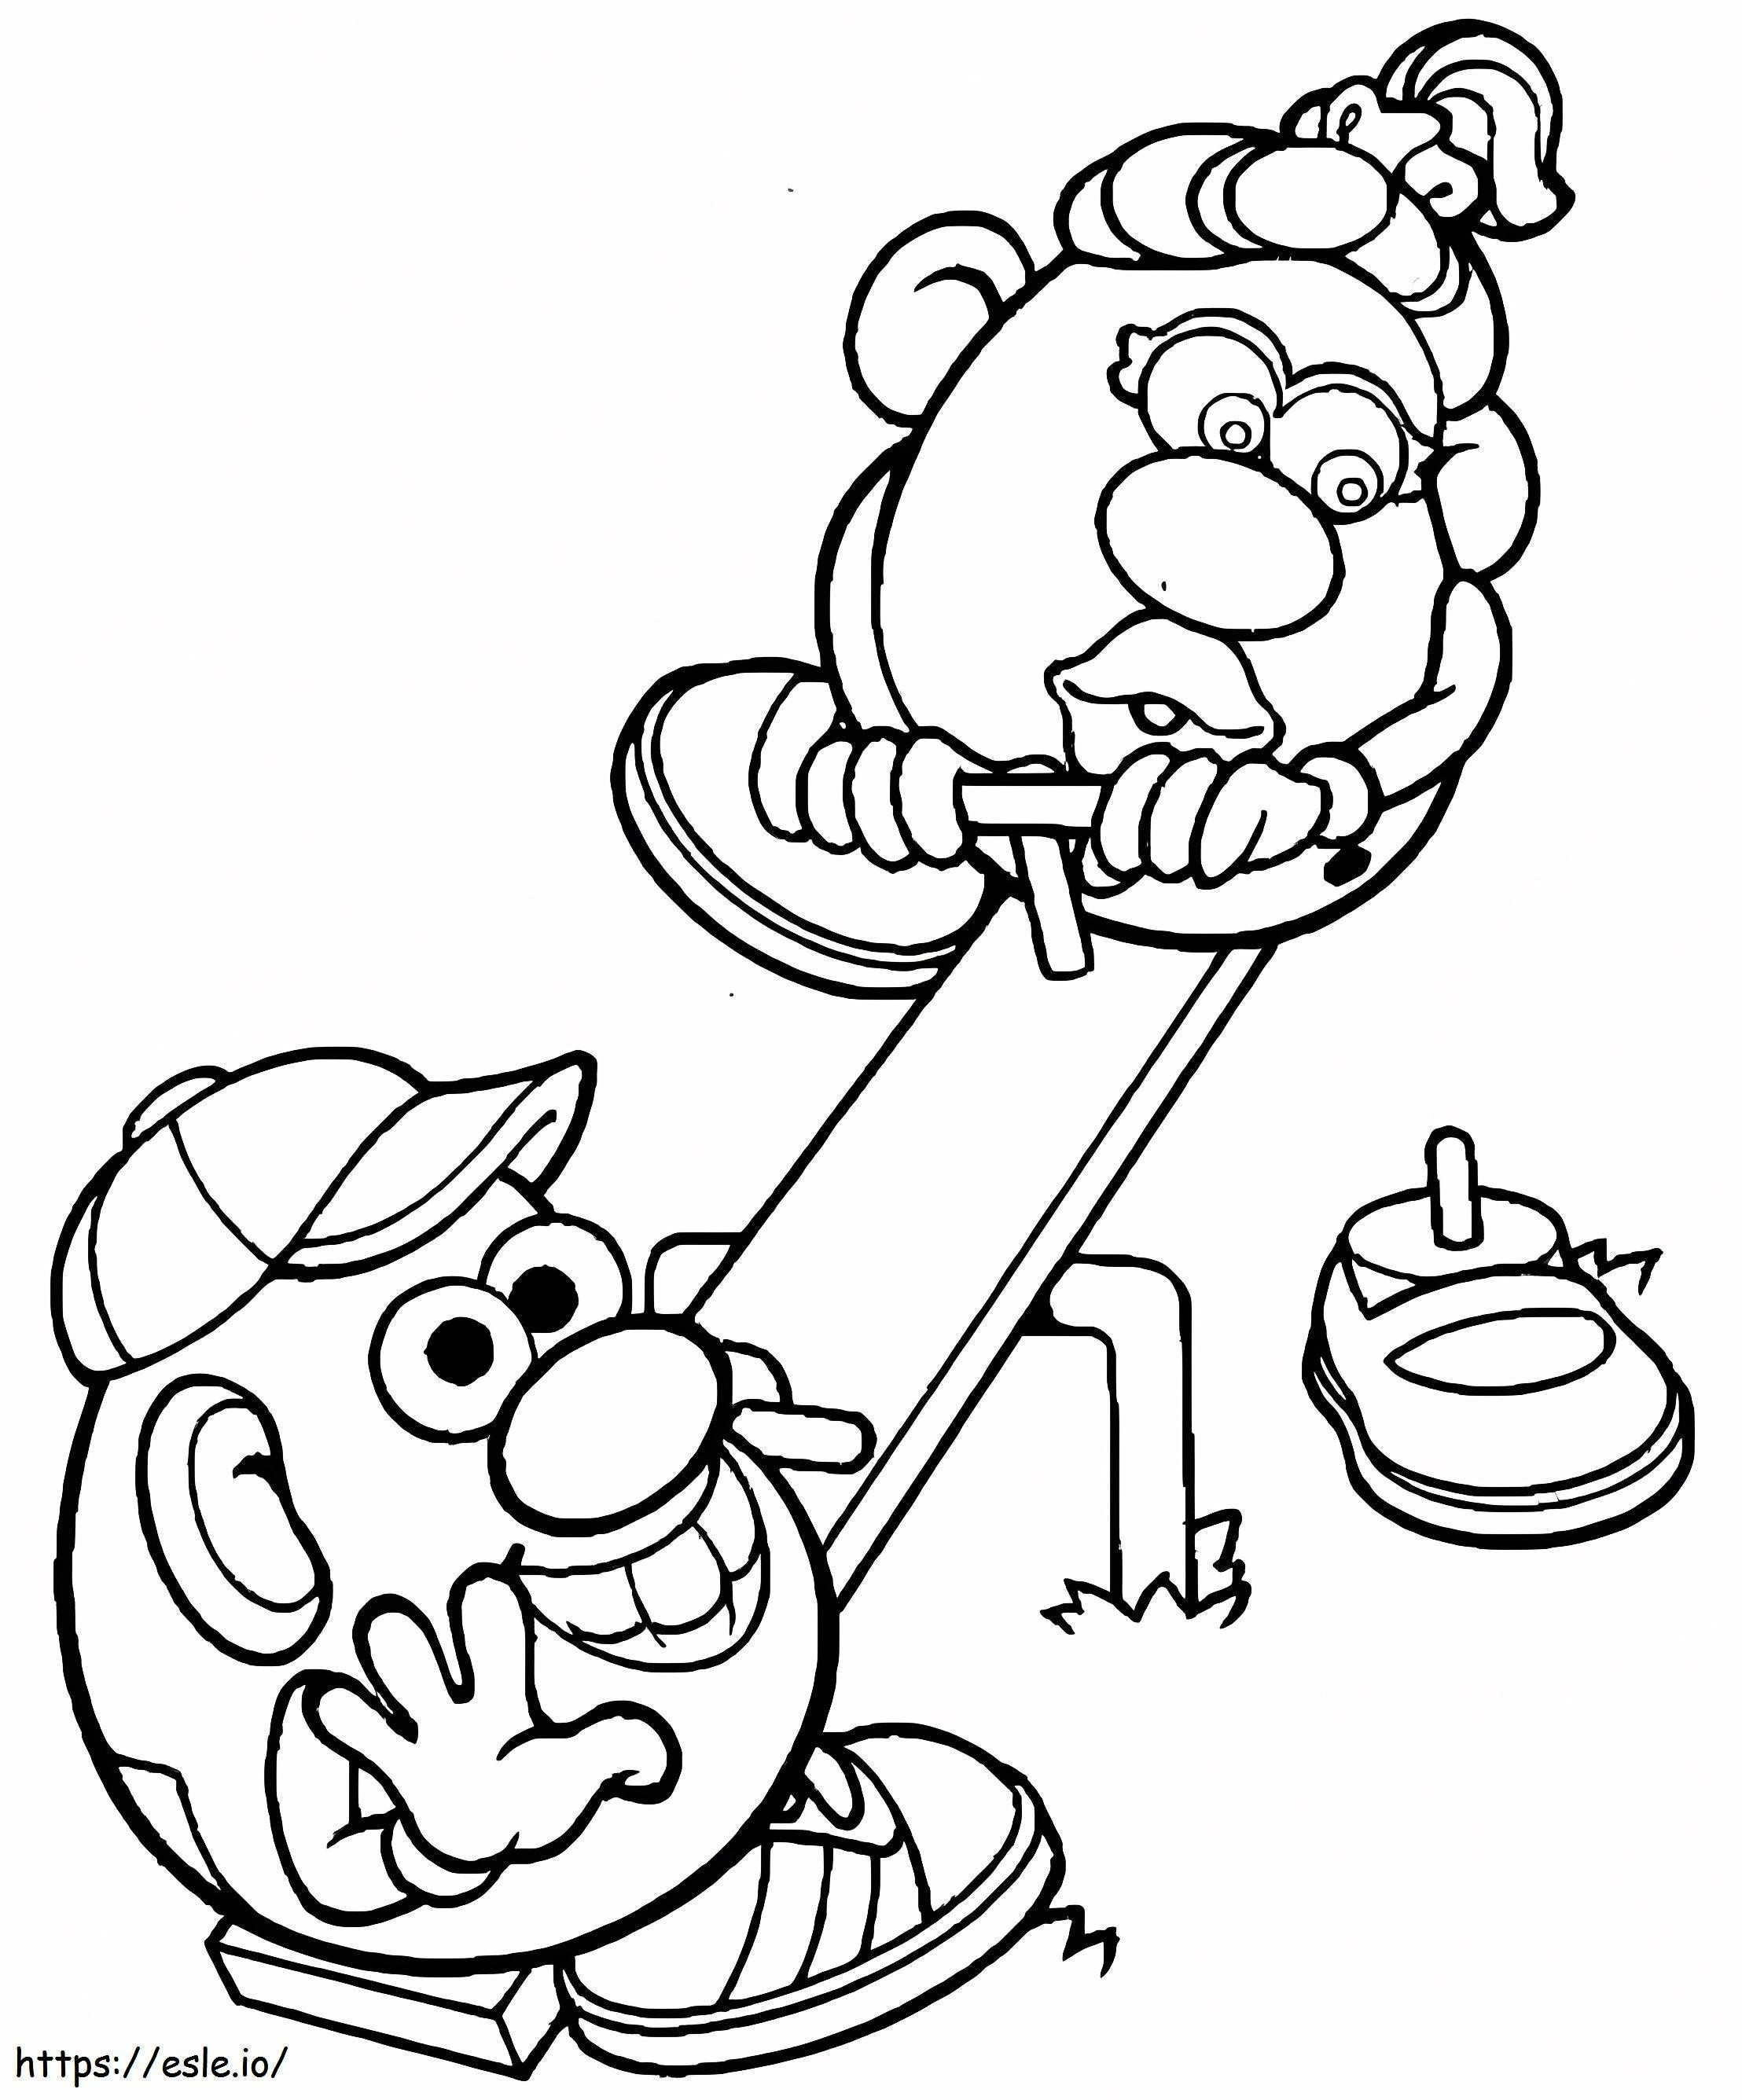 Mrs. And Mr. Potato Head coloring page